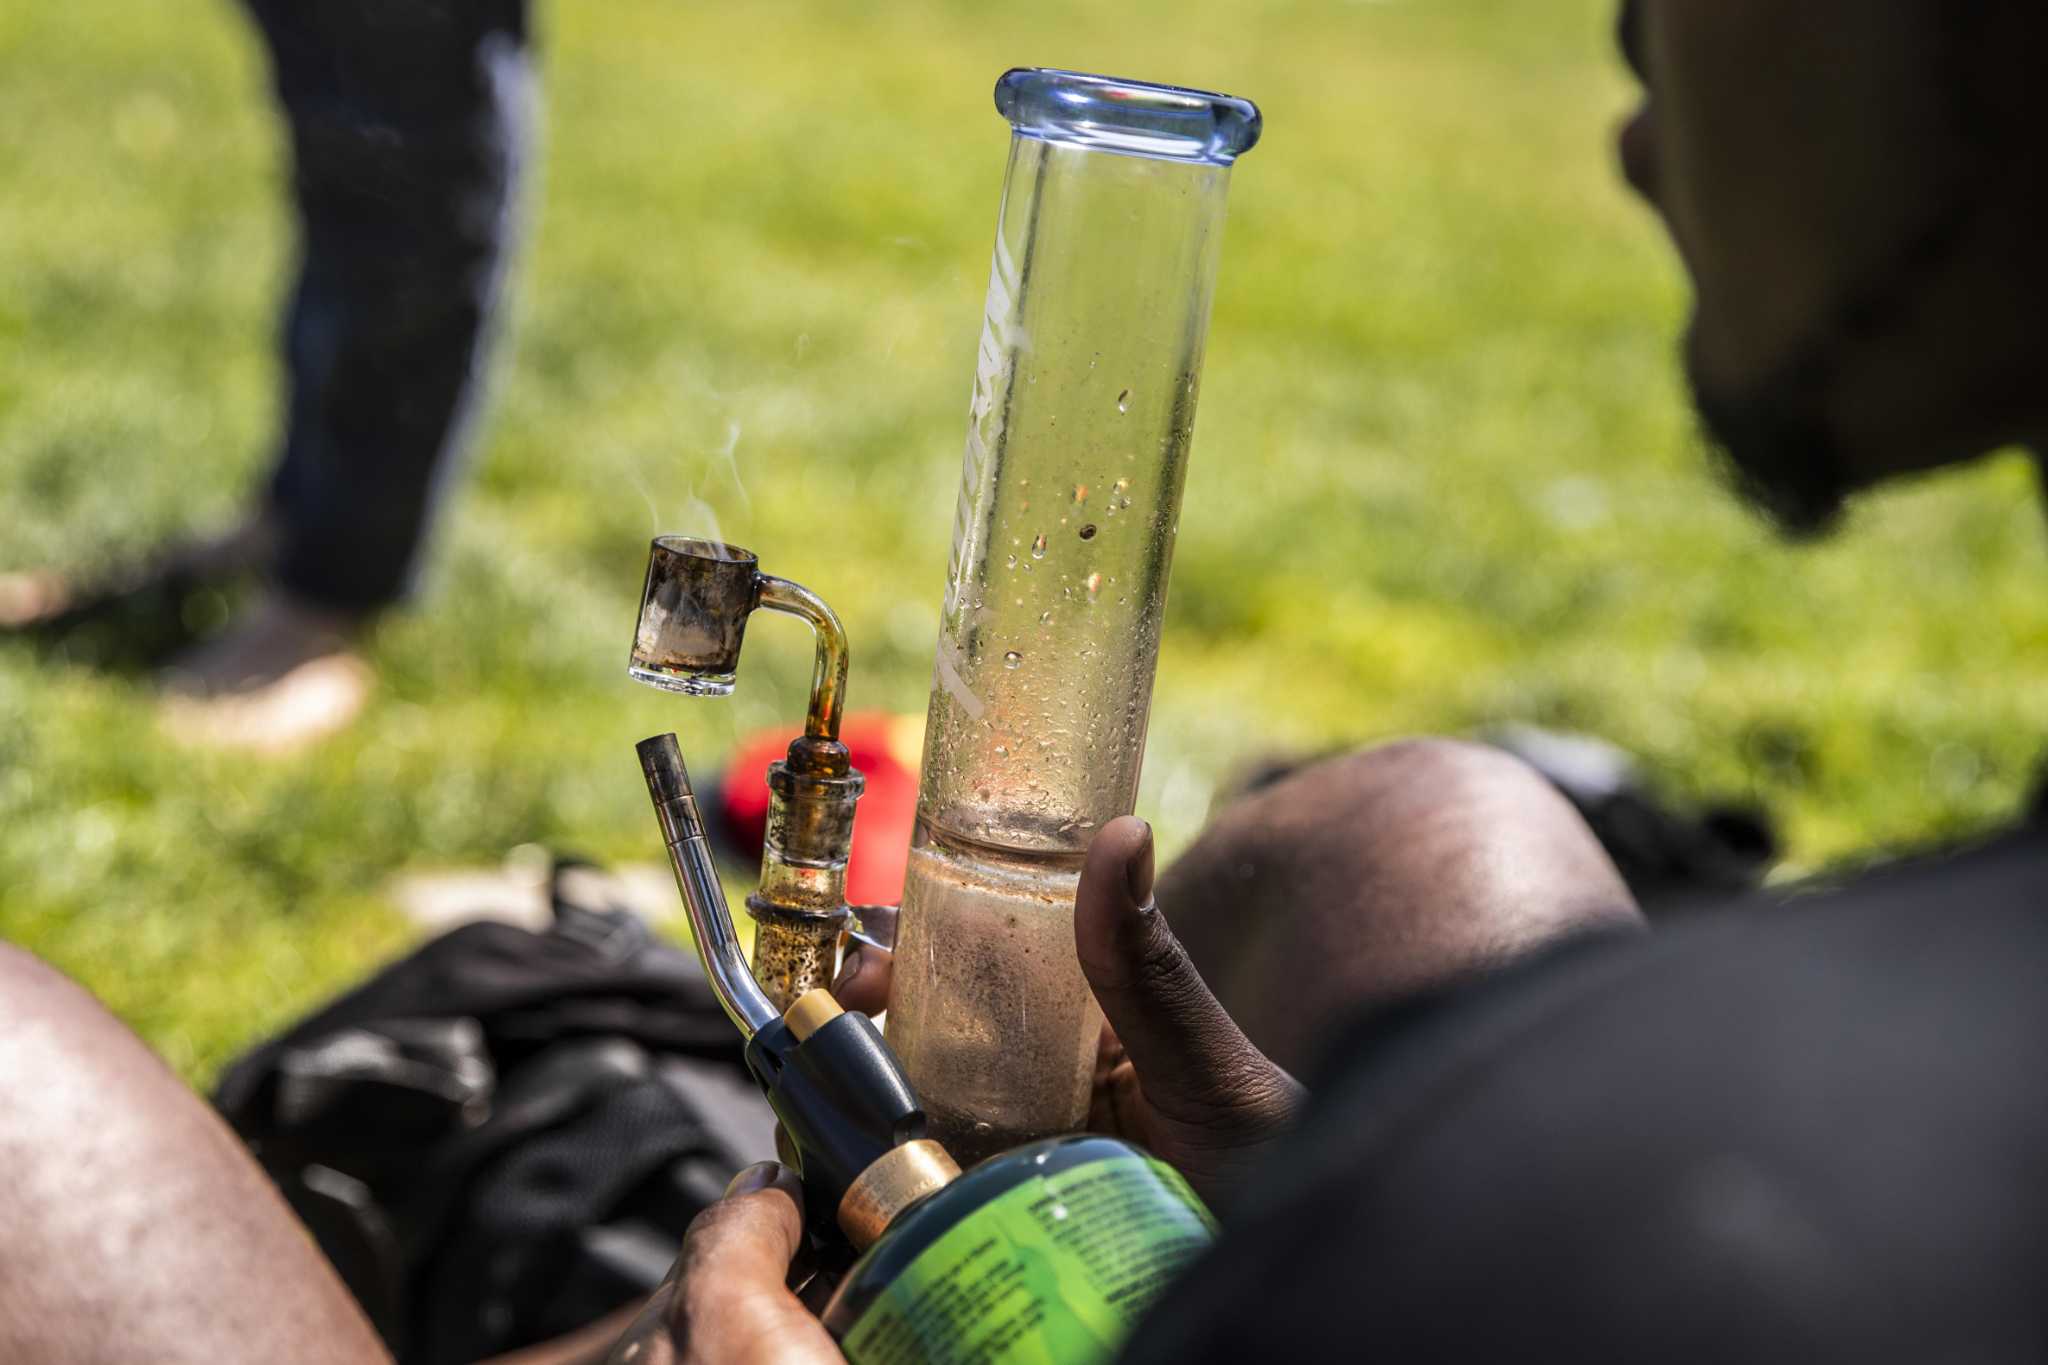 Secondhand bong smoke worse than that from tobacco, study finds